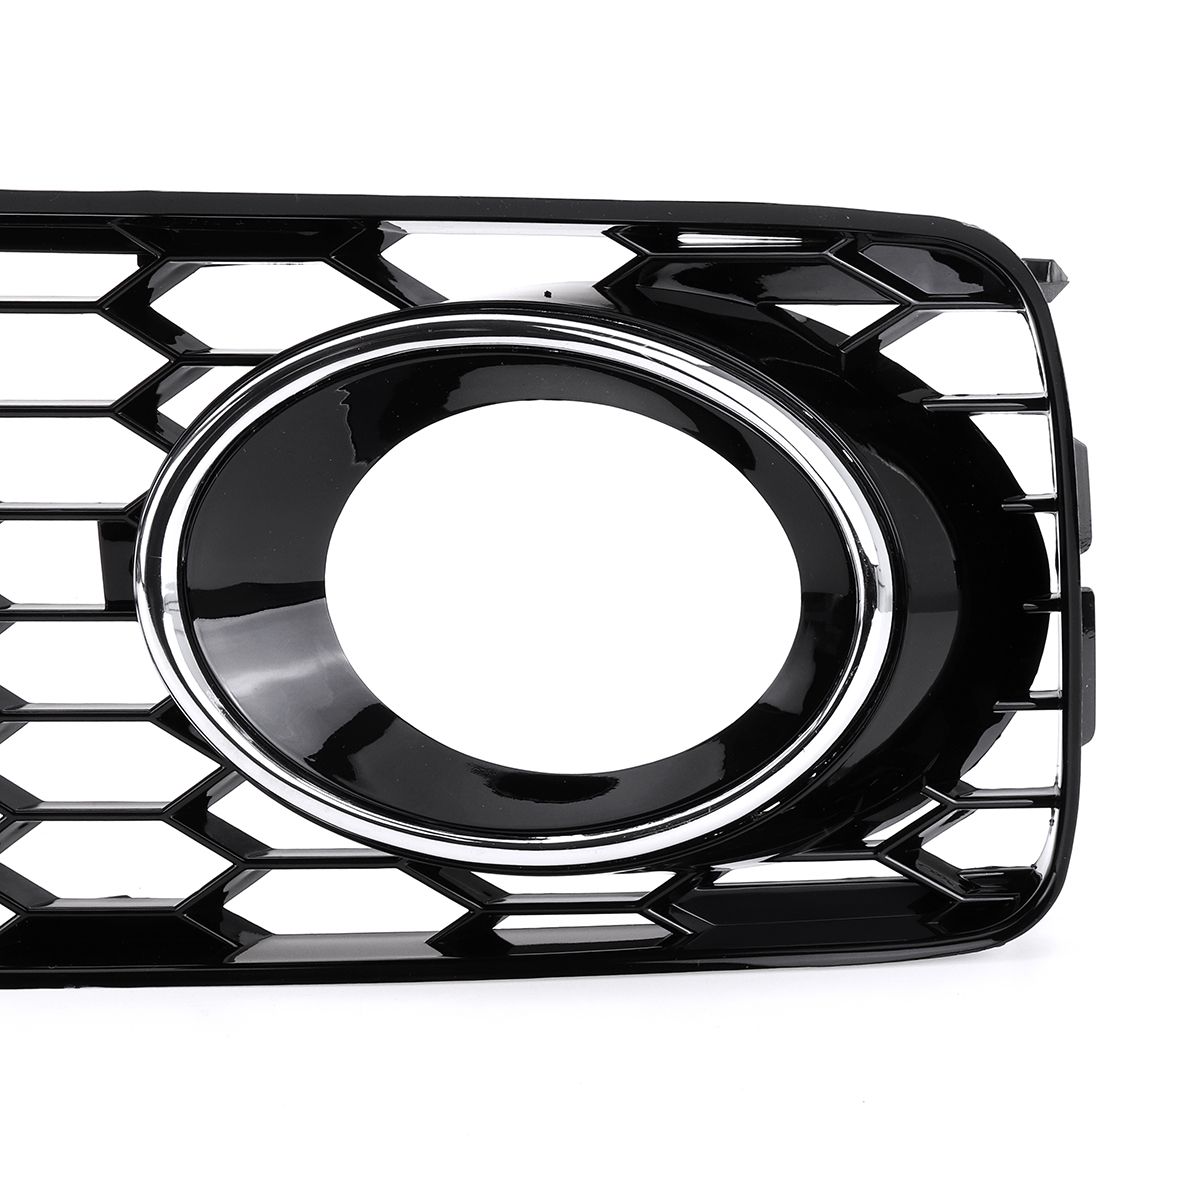 Front-Fog-Light-Lamp-Cover-Grille-Grill-Honeycomb-Hex-Chrome-Silver-For-Audi-A5-S-Line-S5-B8-RS5-200-1695671